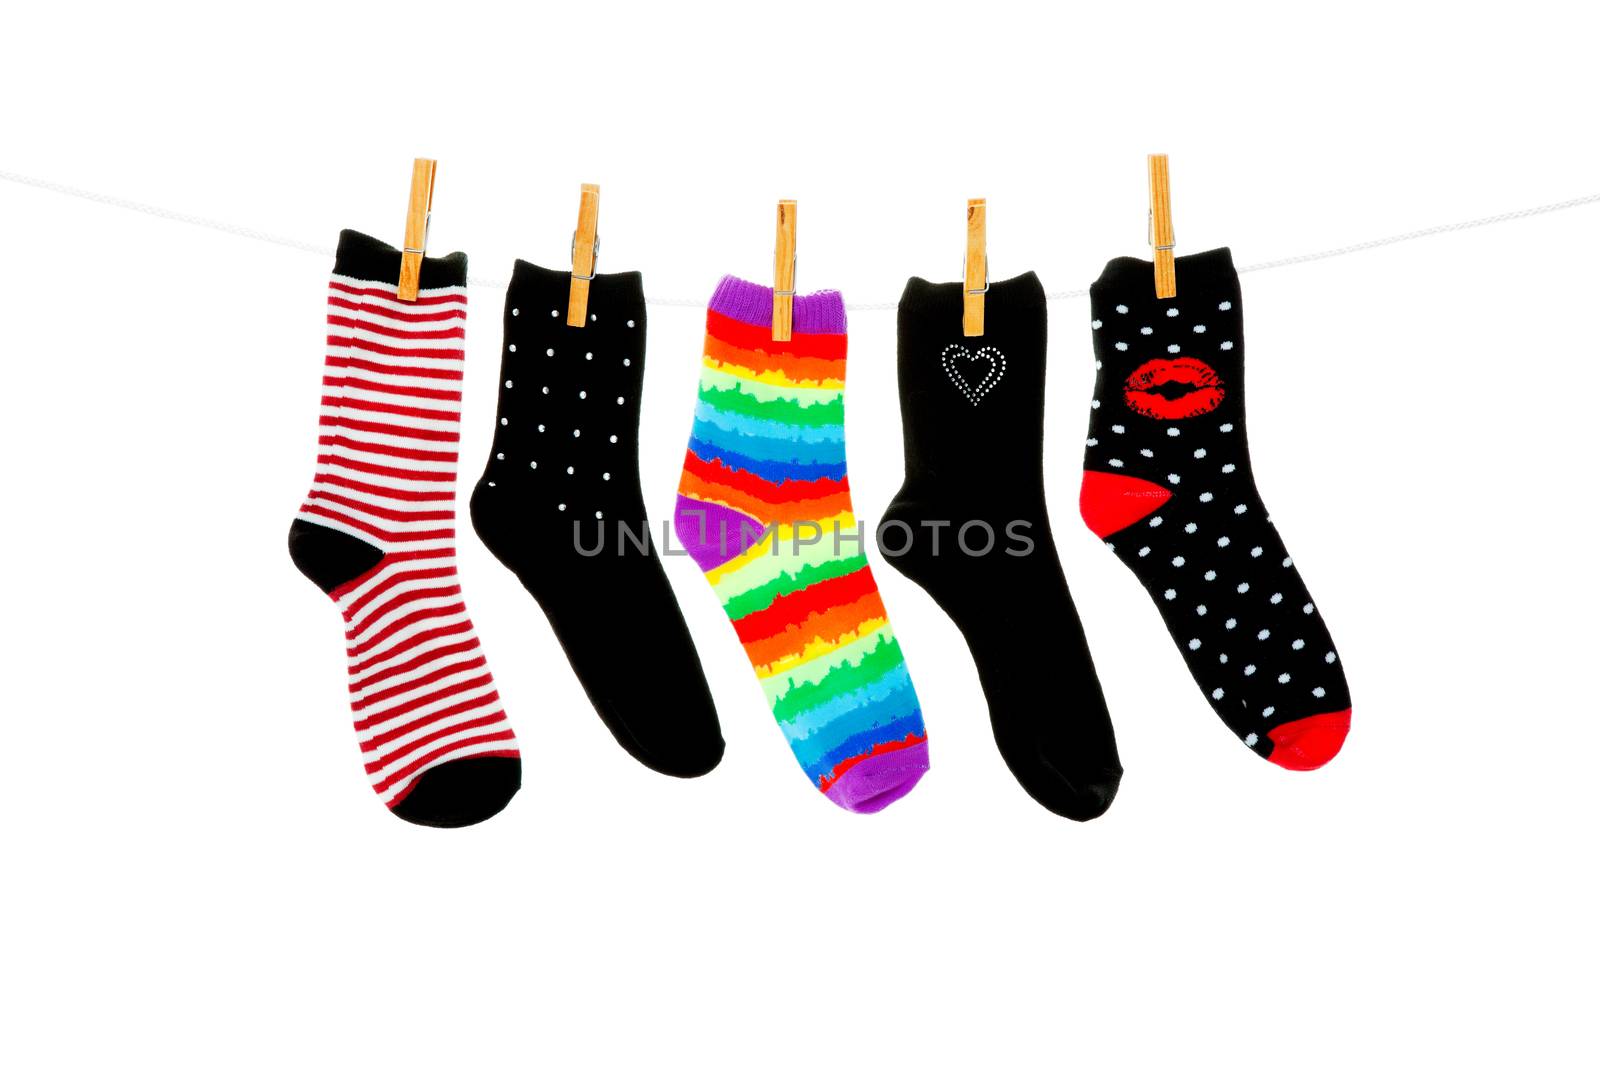 Odd socks whose mates have been lost, hanging on a clothesline.  Shot on white background.